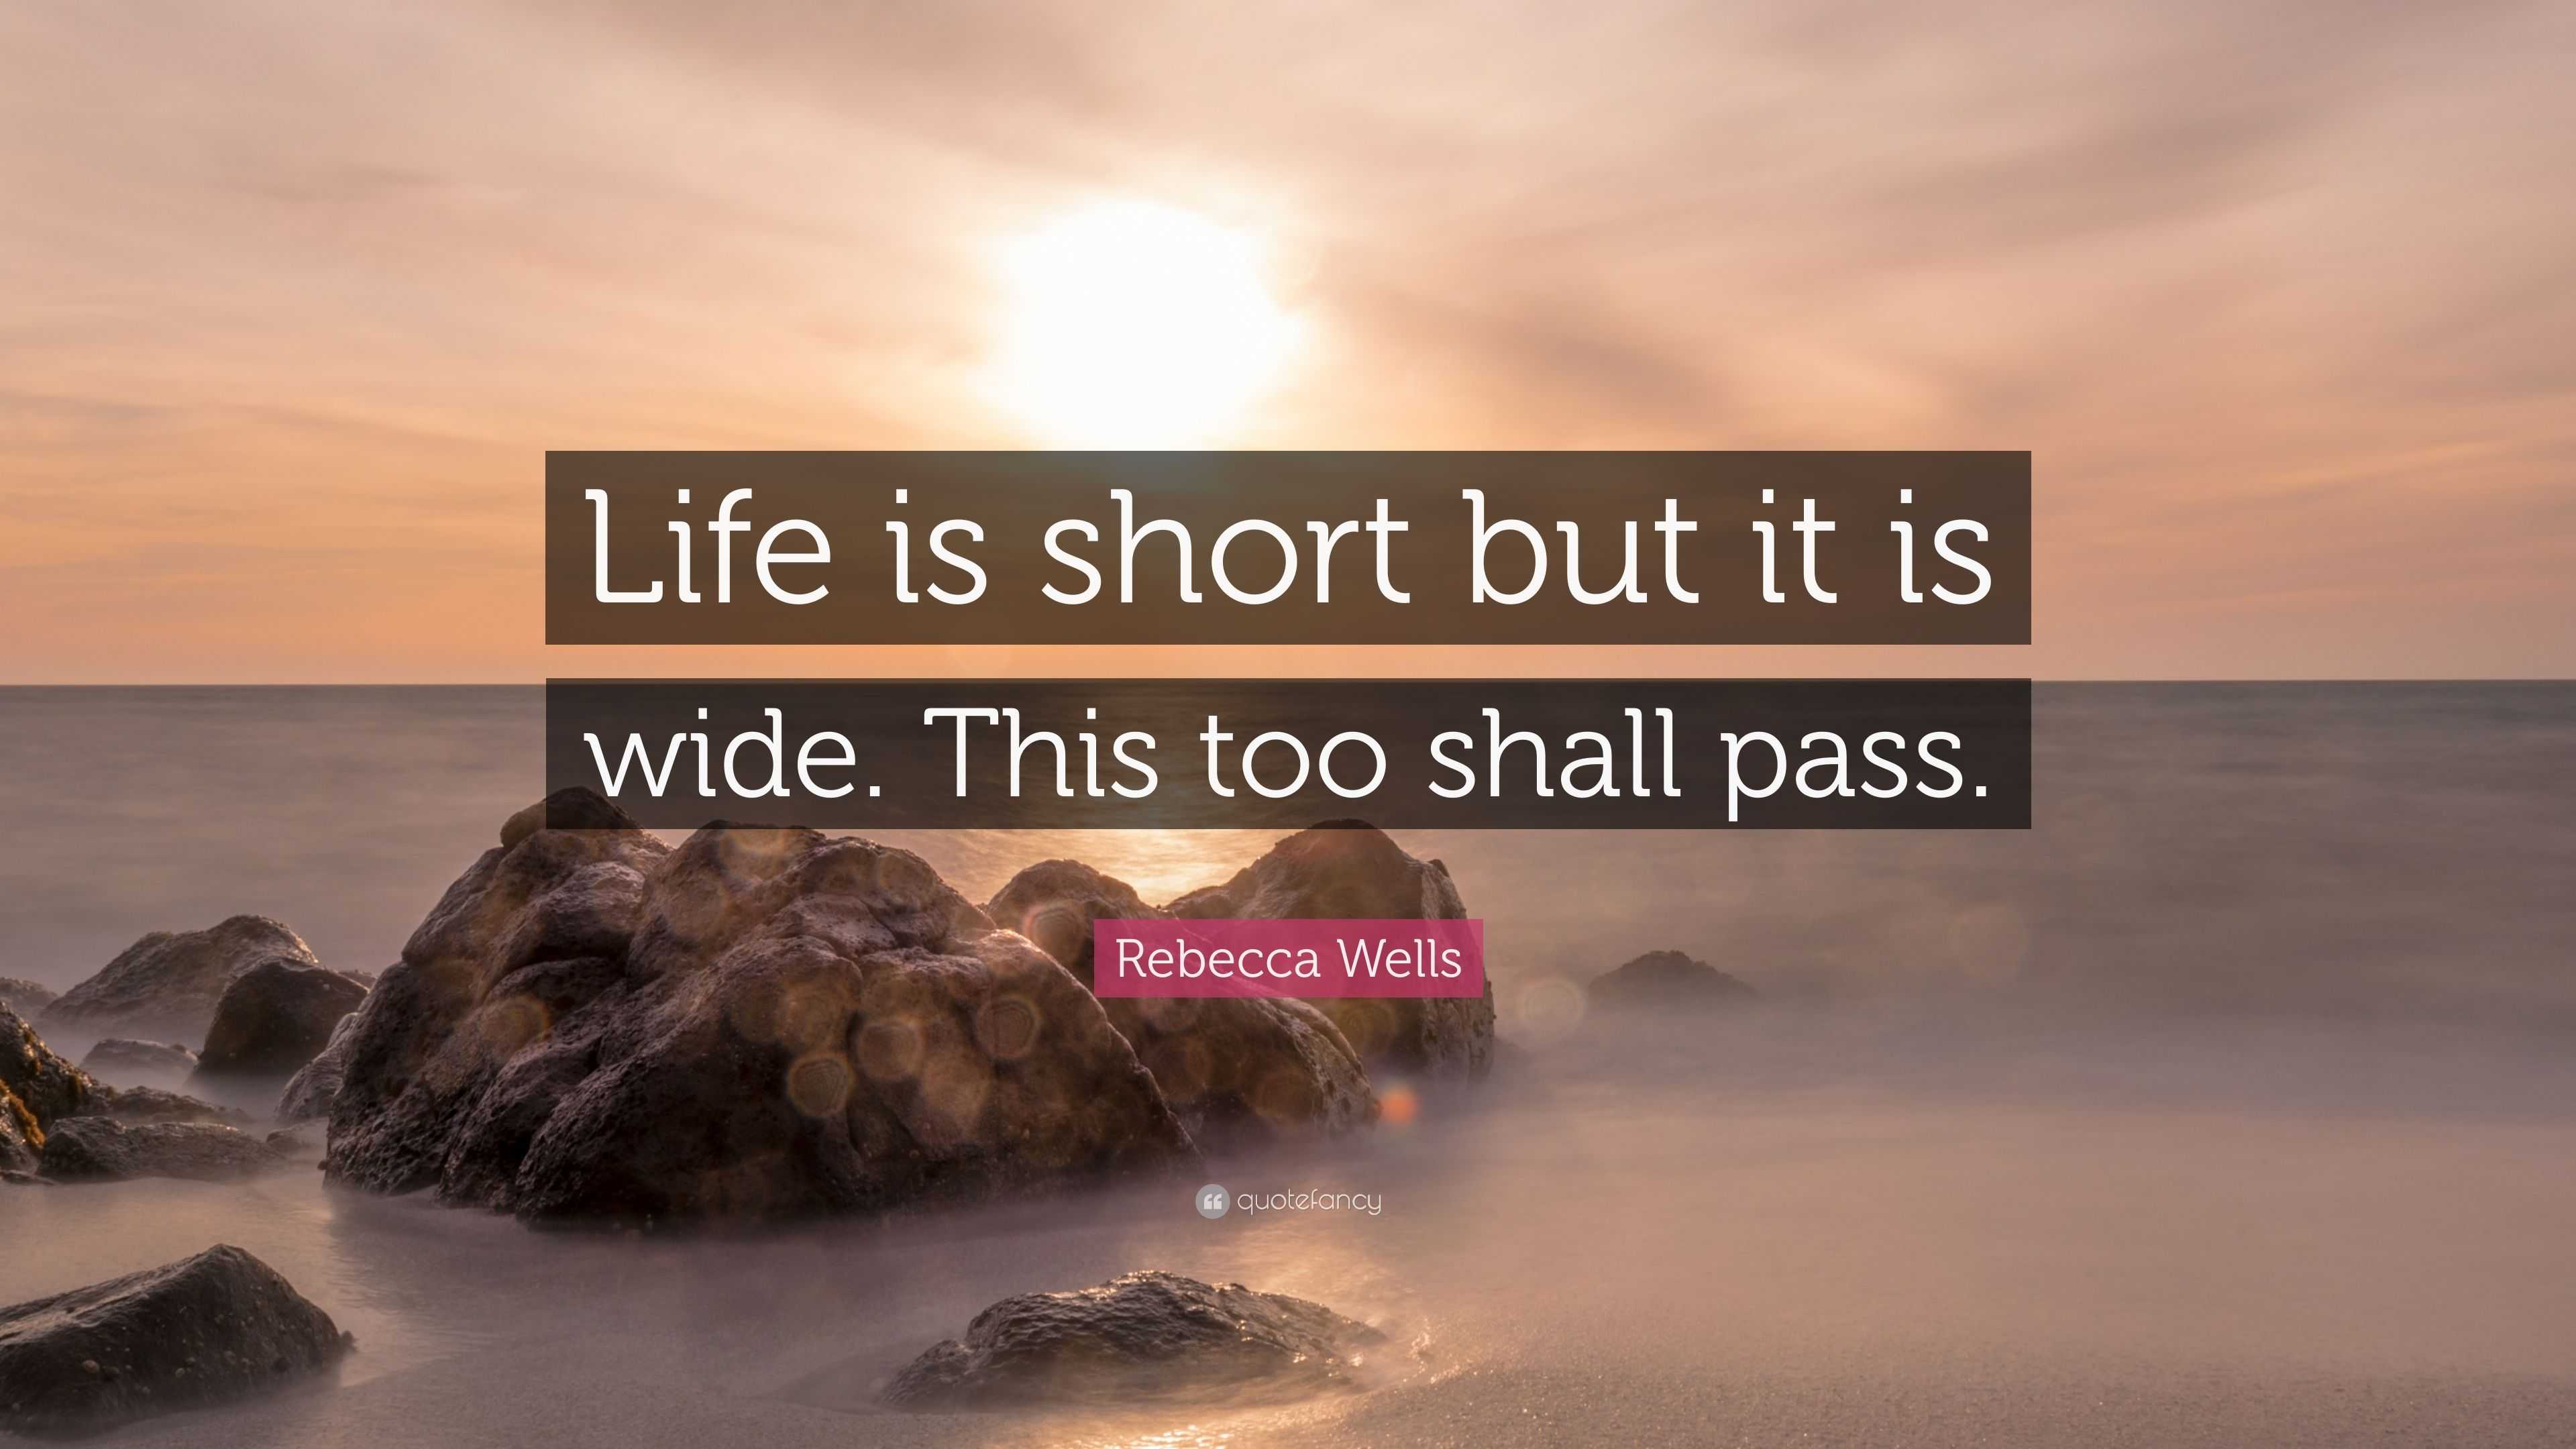 Rebecca Wells Quote: “Life is short but it is wide. This too shall pass.”